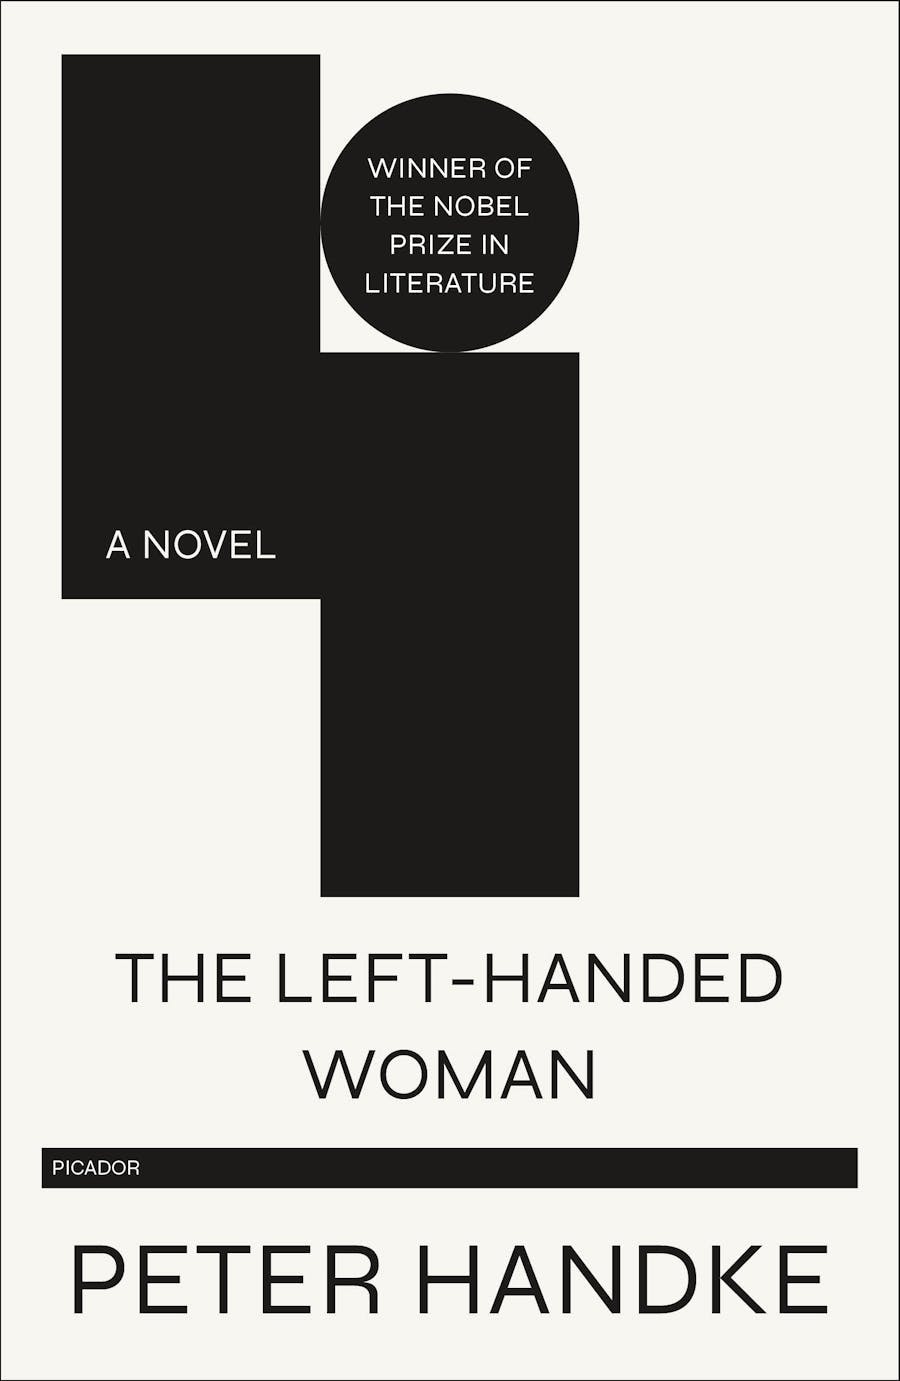 The Left Handed Woman by Peter Handke